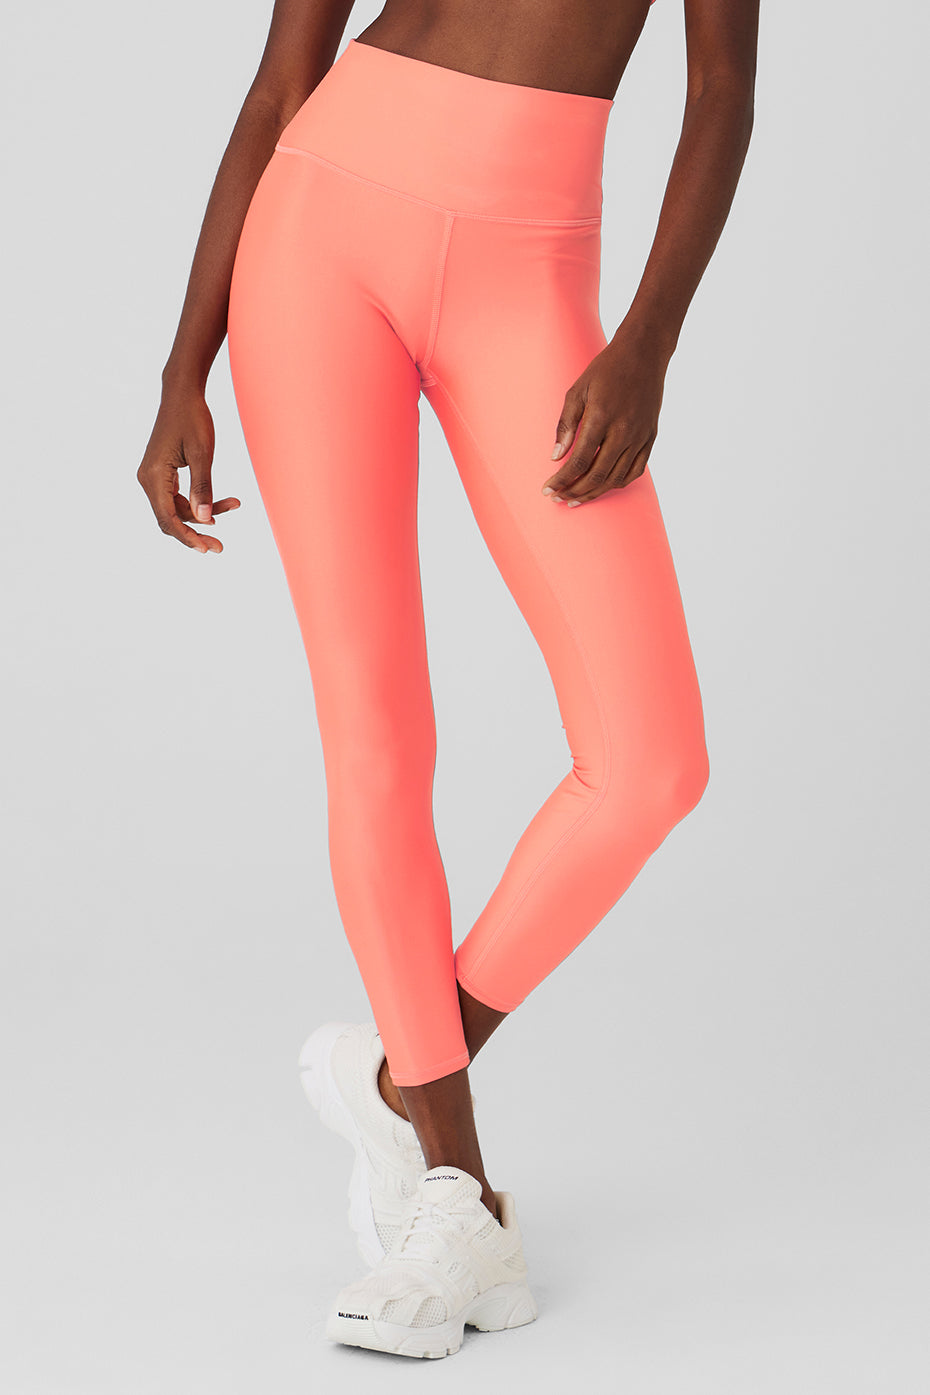 Alo Yoga Leggings Pink Size XXS - $79 (26% Off Retail) - From Pool Room